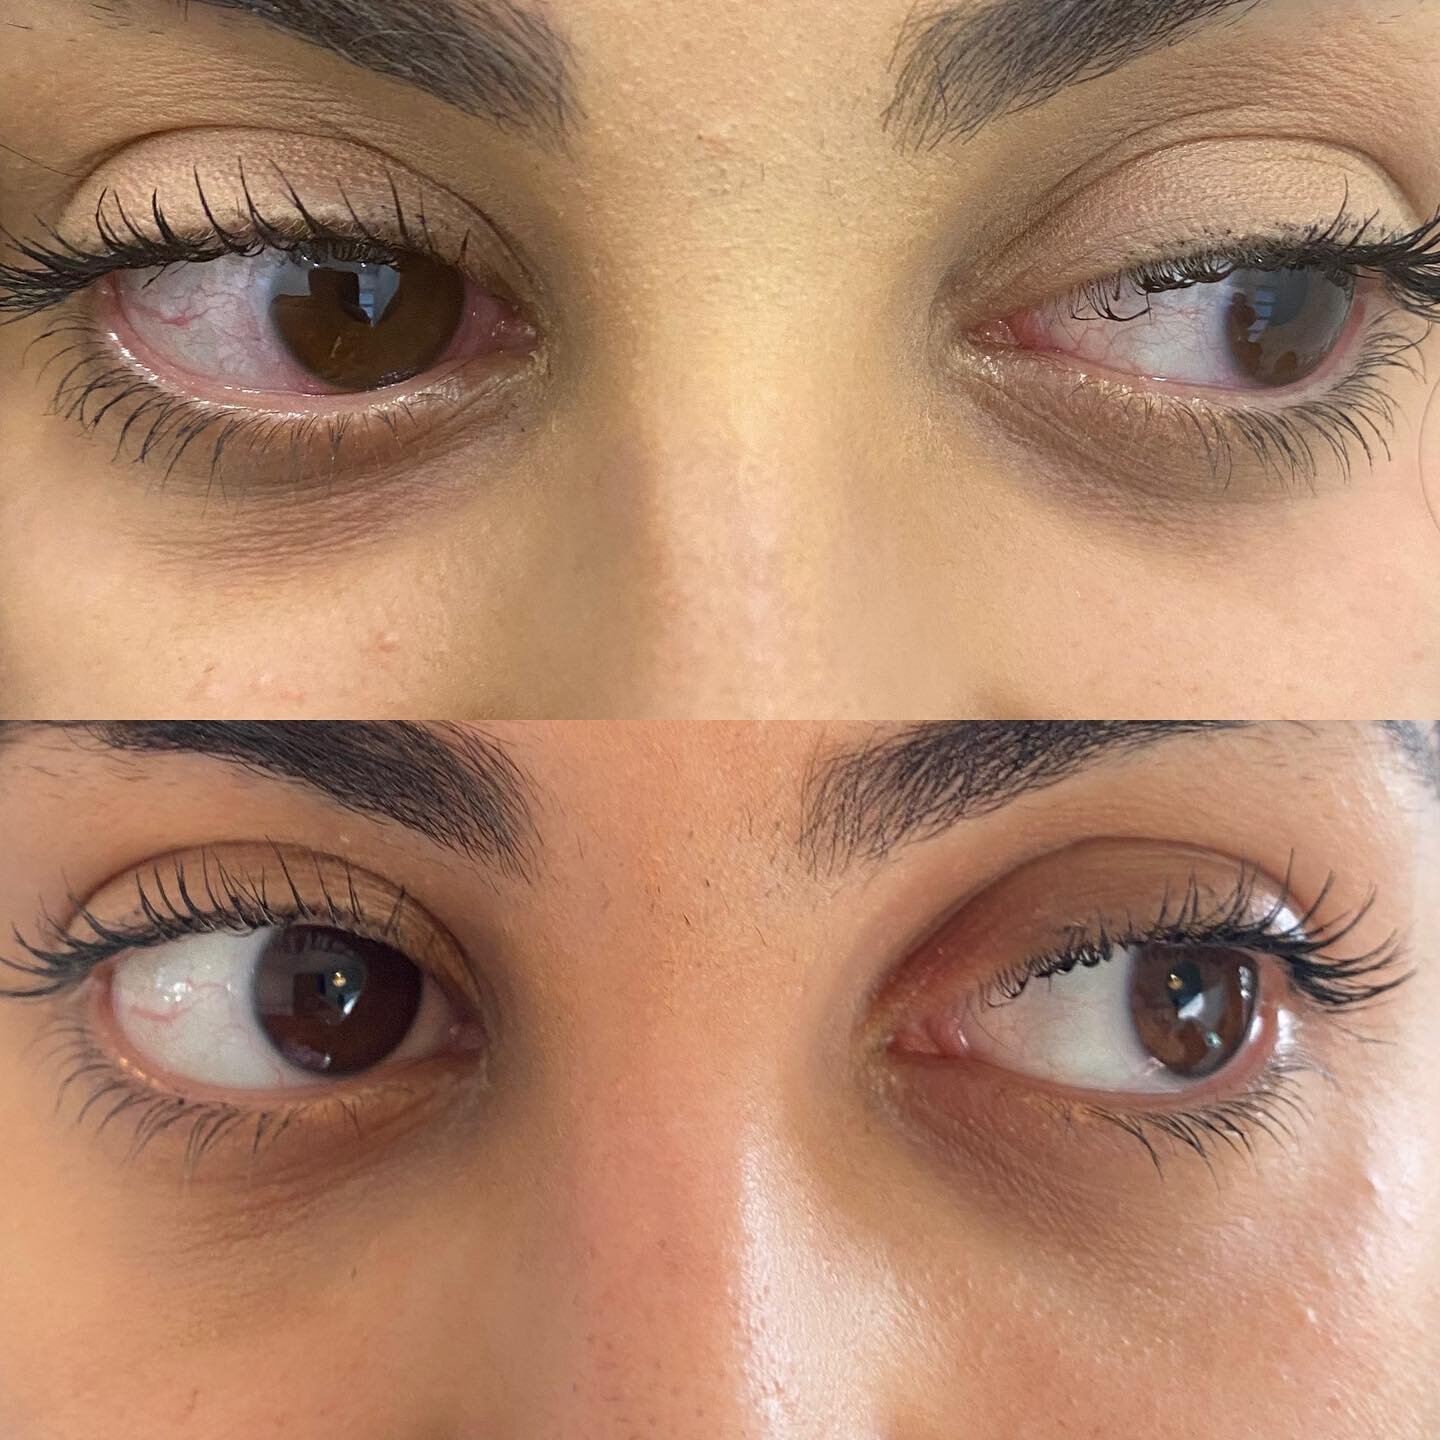 TEAR TROUGH FILLERS!
Before and after 😍! 
This type of treatment is best for those clients with hollowness under their eyes. Hollow under eyes can cause the appearance of dark circles which can be corrected using dermal fillers
.
.
Not everybody is 